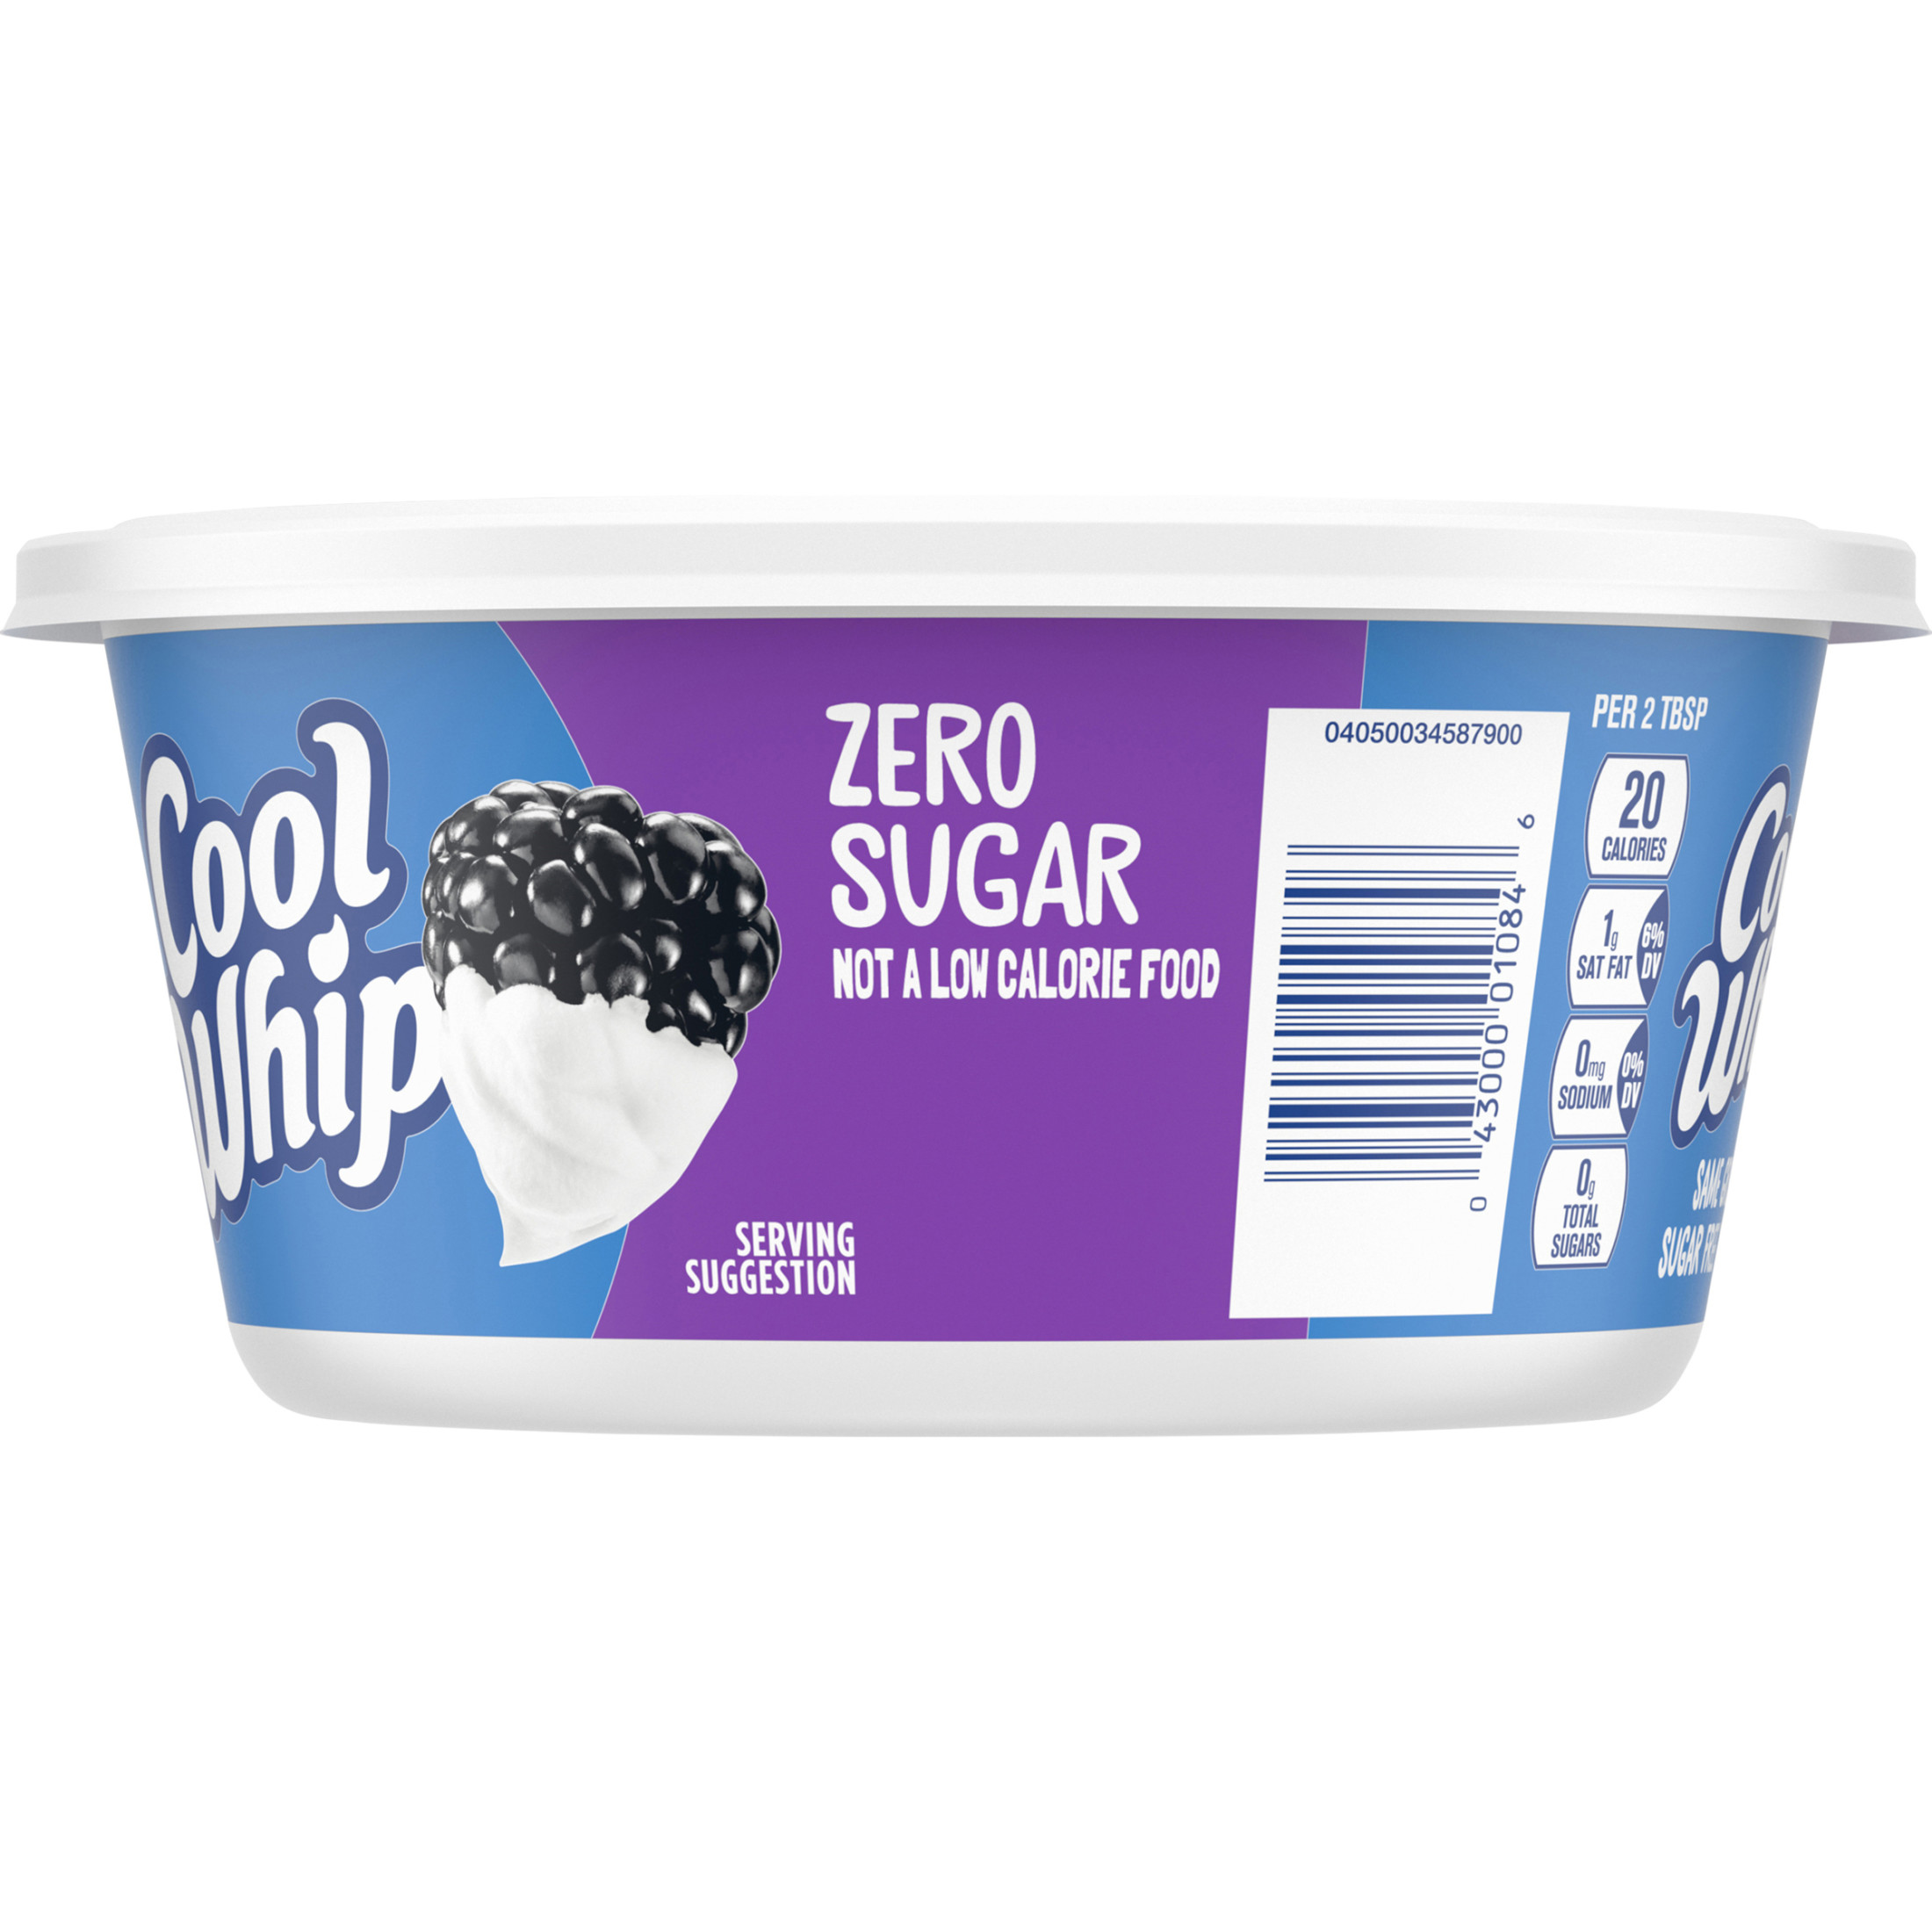 Cool Whip Zero Sugar Whipped Cream Topping, 8 oz Tub - image 3 of 11